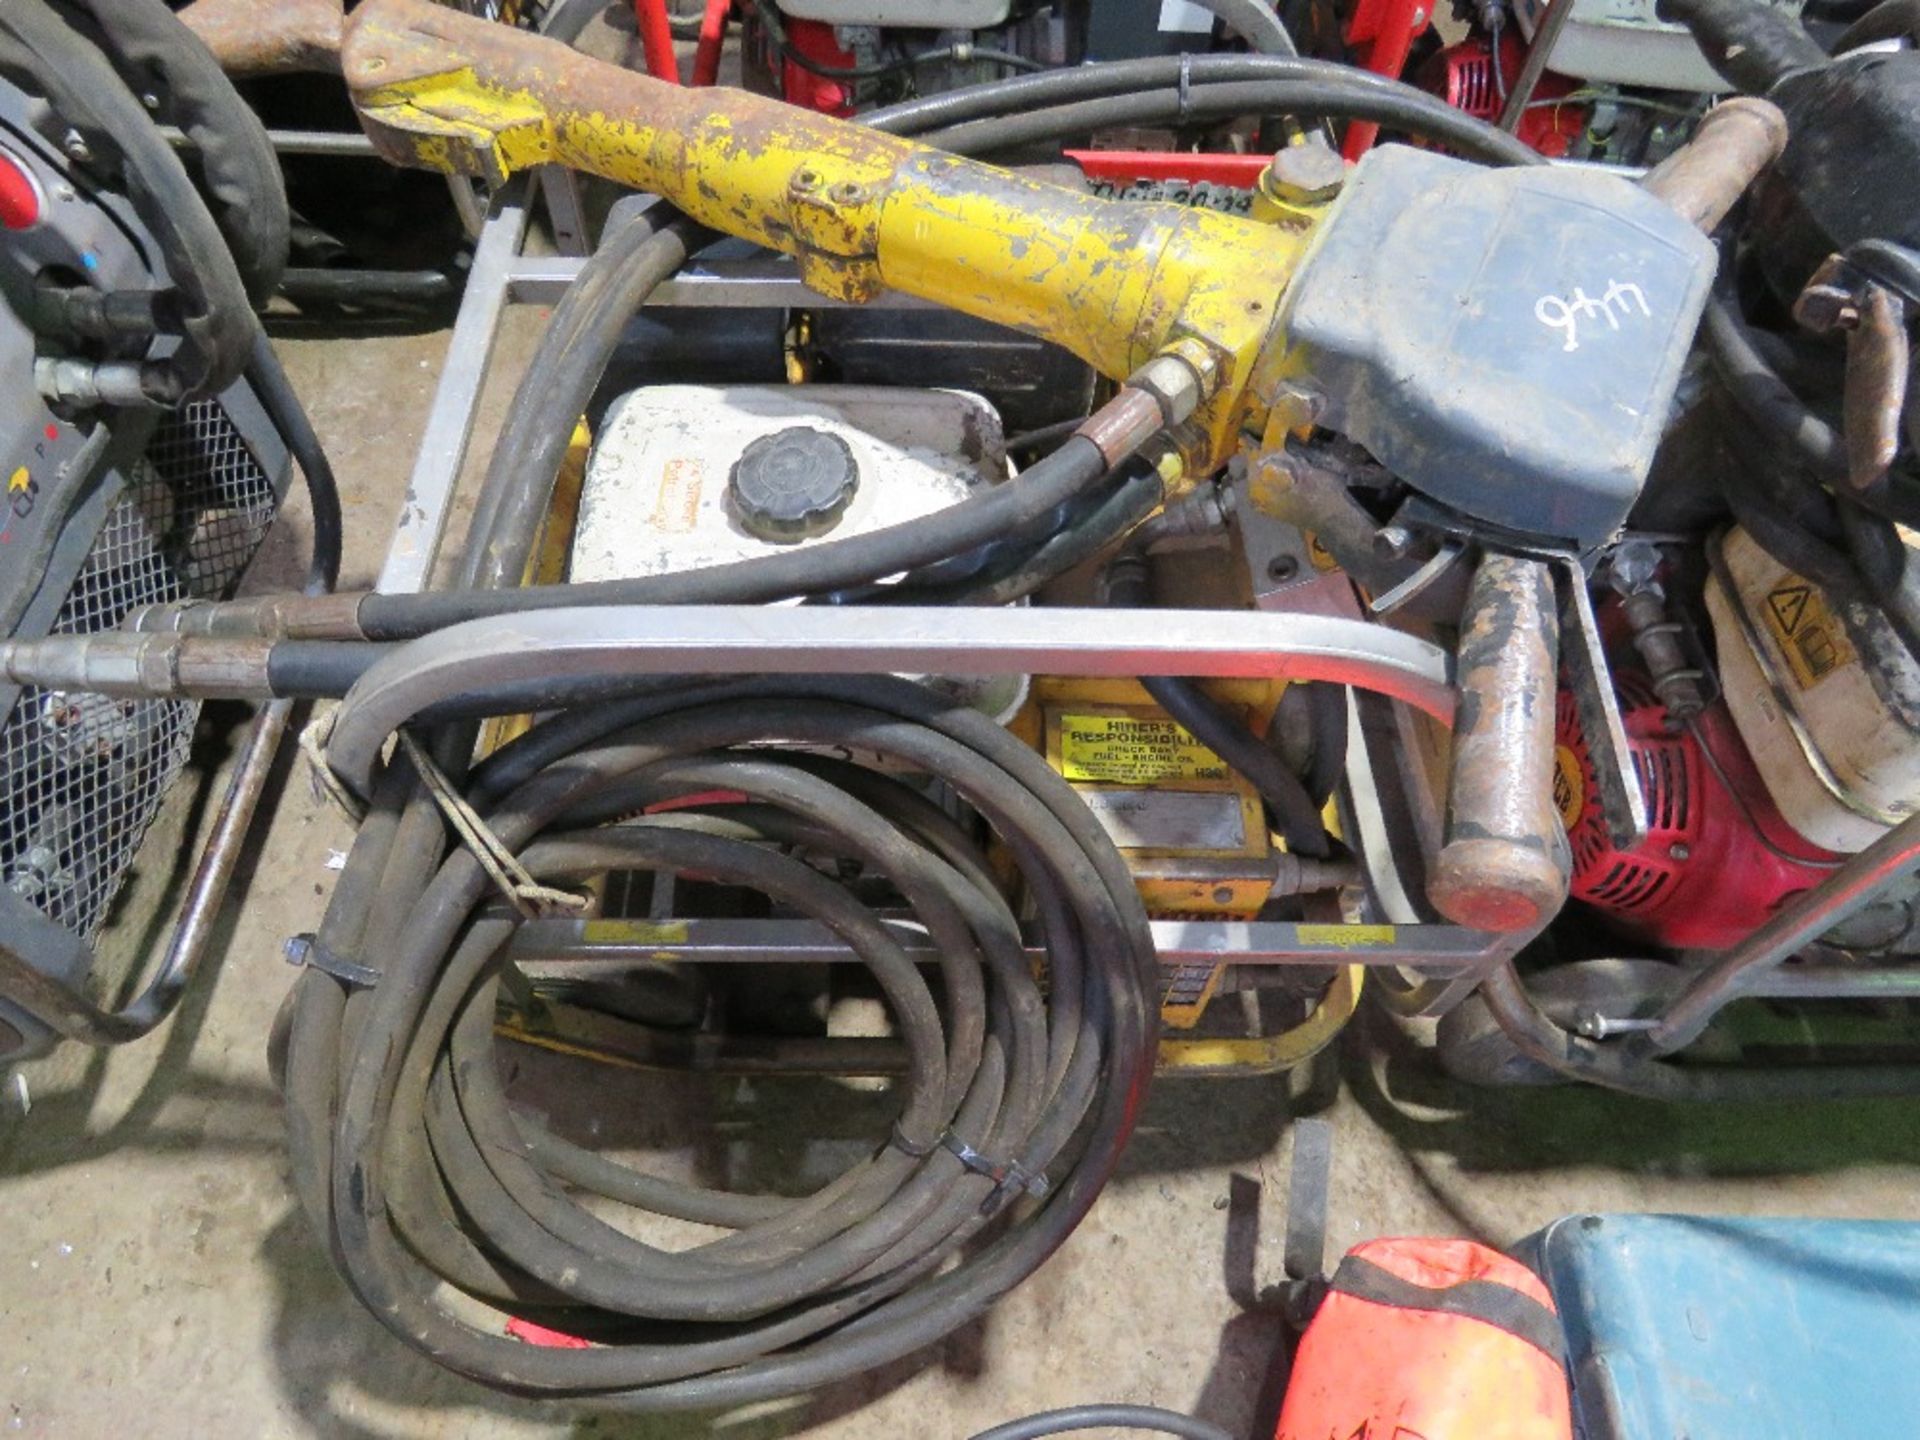 BENFORD HYDRAULIC BREAKER PACK WITH HOSE AND GUN. - Image 3 of 3